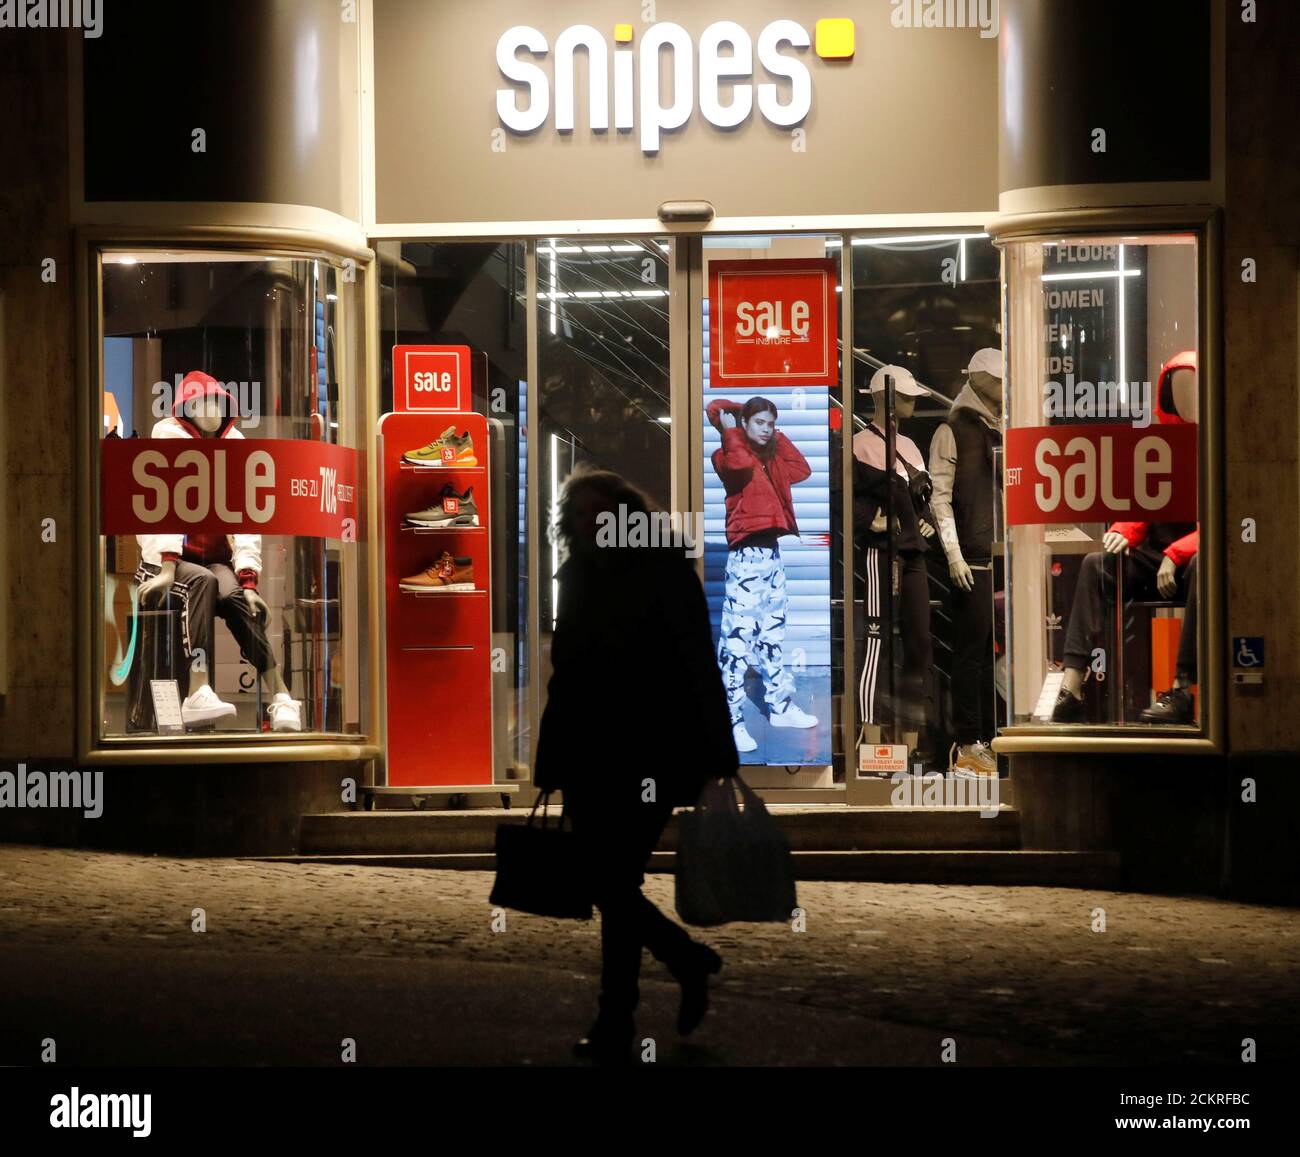 Sale discounts are offered on a display window of a Snipes fashion store in  Zurich, Switzerland January 7, 2019. Picture taken January 7, 2019.  REUTERS/Arnd Wiegmann Stock Photo - Alamy